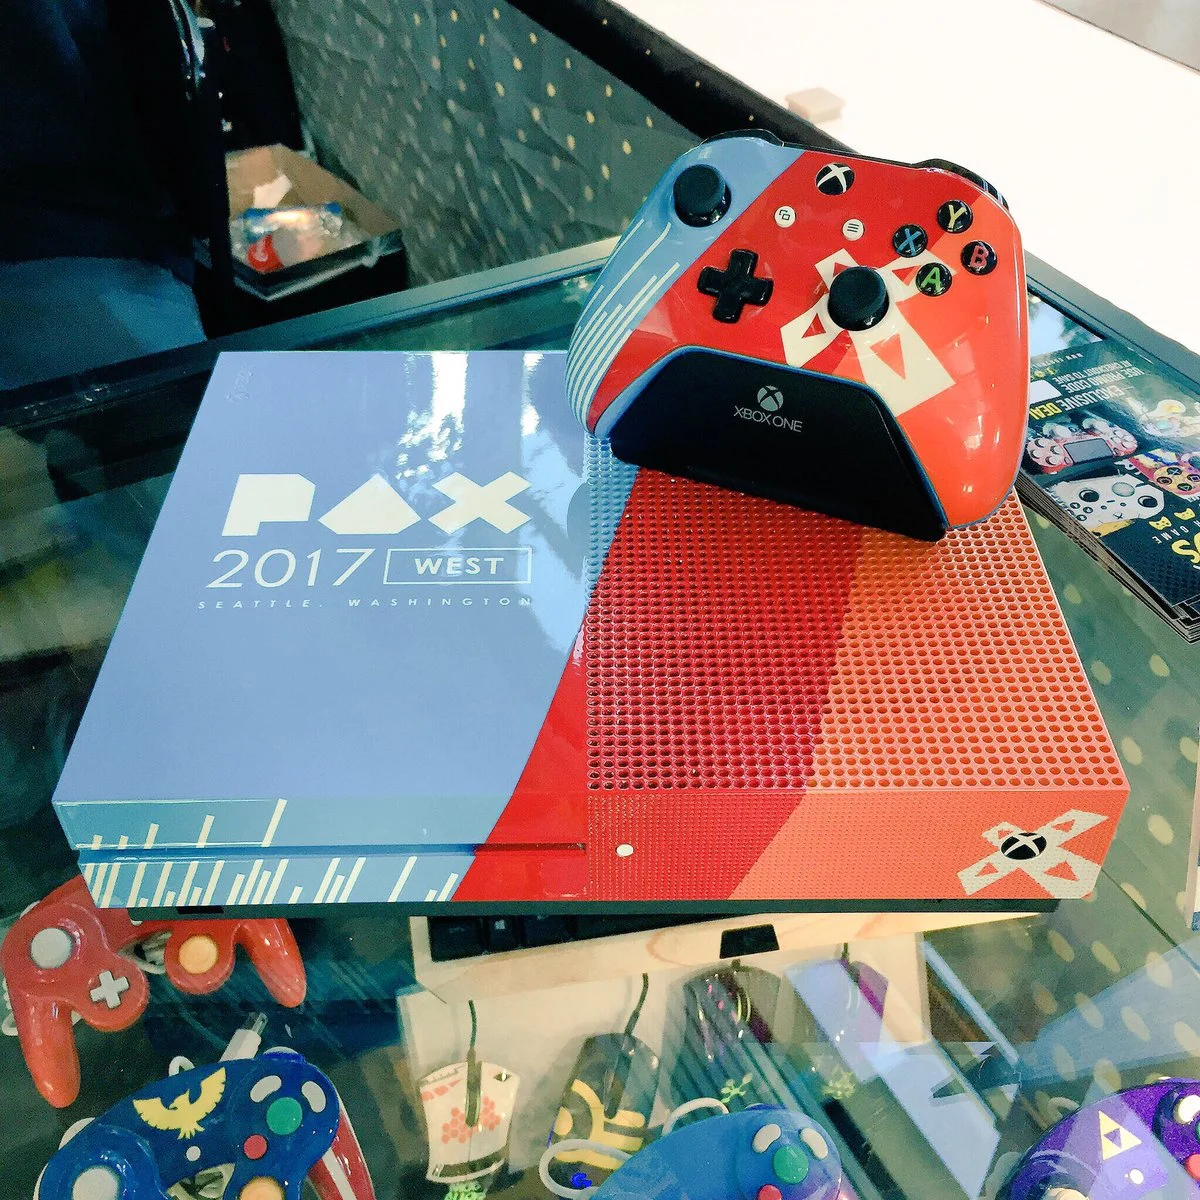  Microsoft Xbox One S Pax West 2017 Console